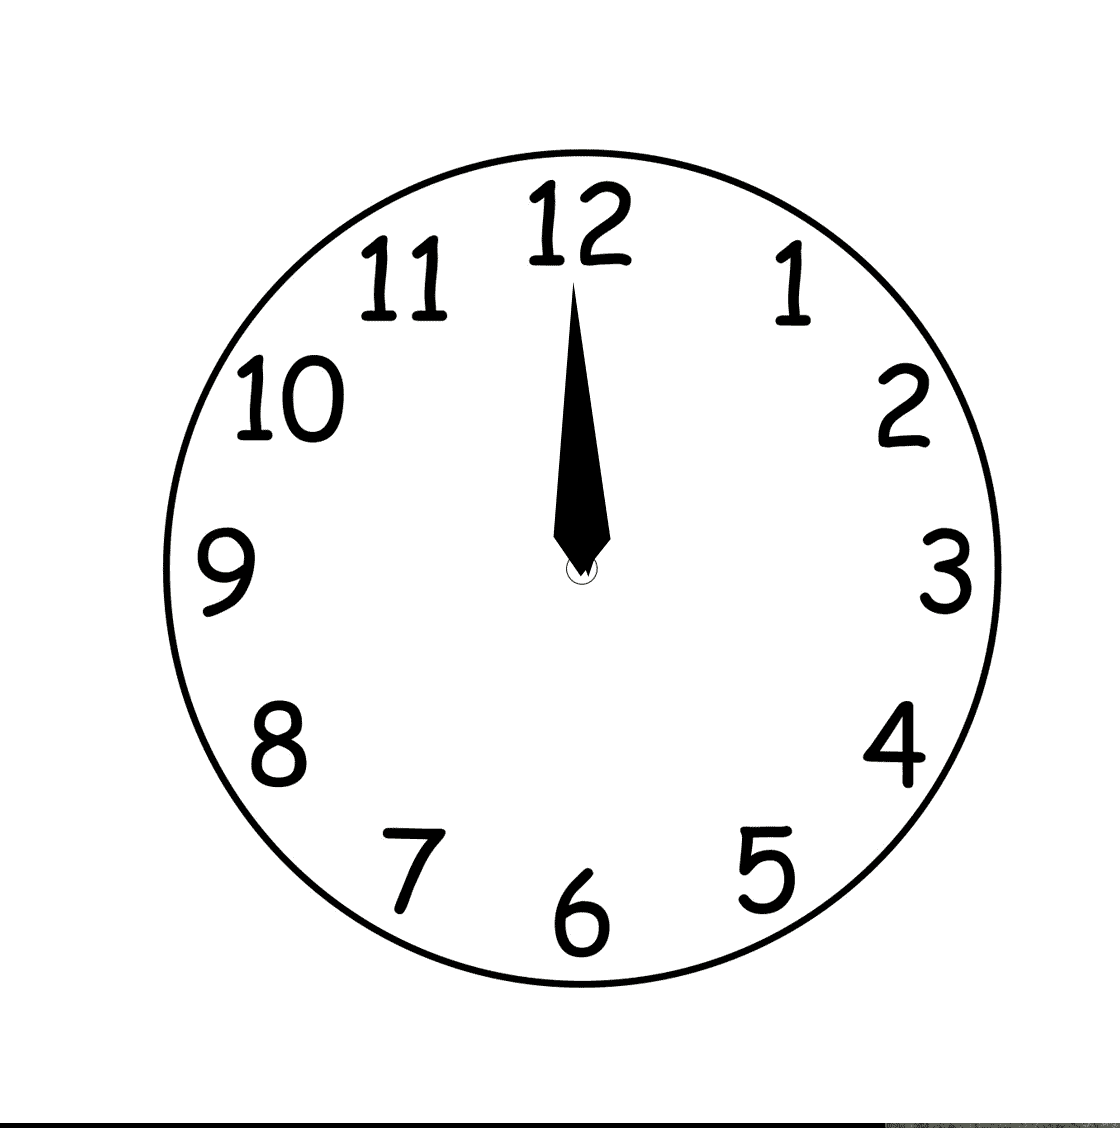 Images For > Blank Analog Clock Clip Art